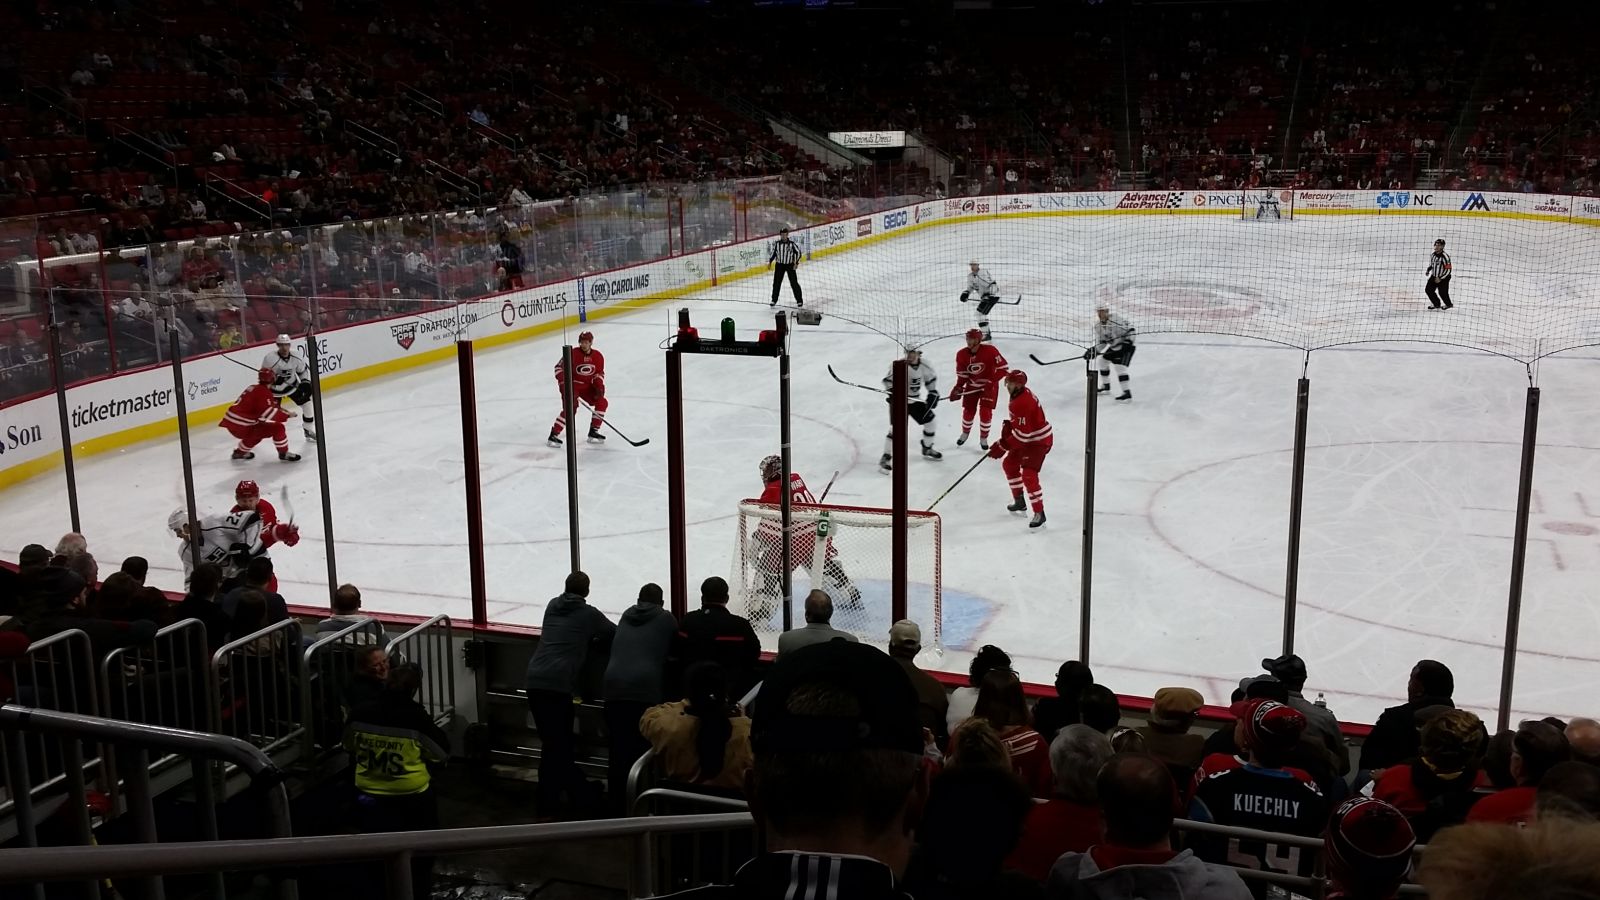 section 111, row m seat view  for hockey - pnc arena